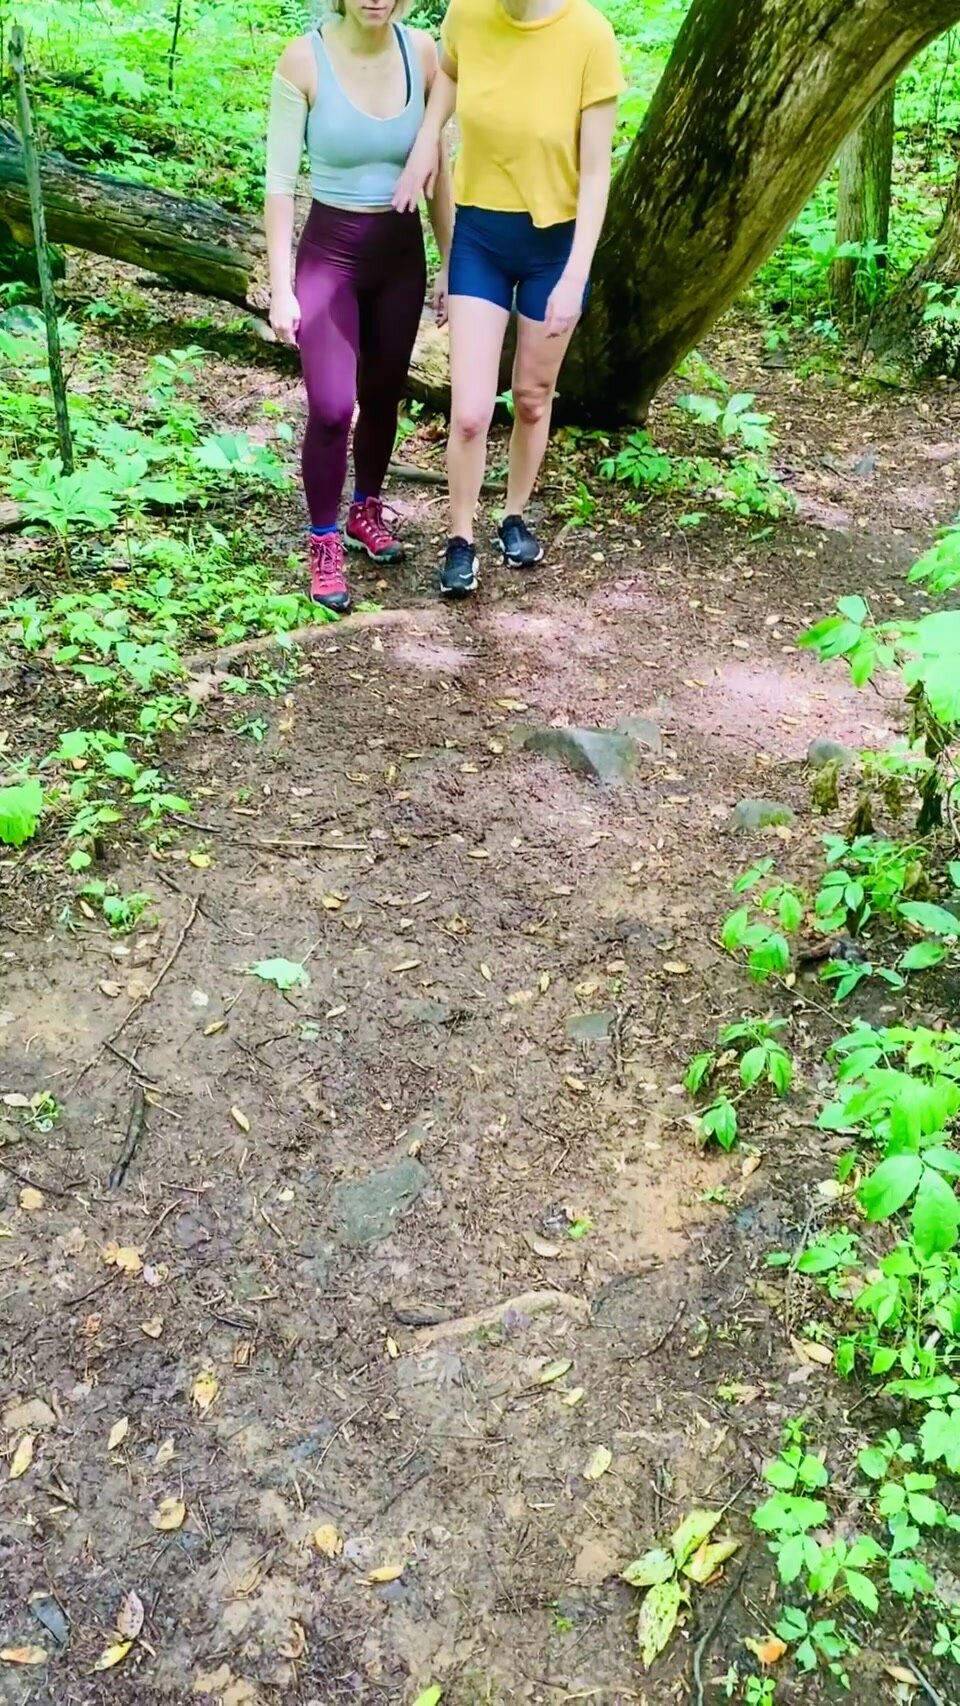 Gets her mates tits out in the woods ENF